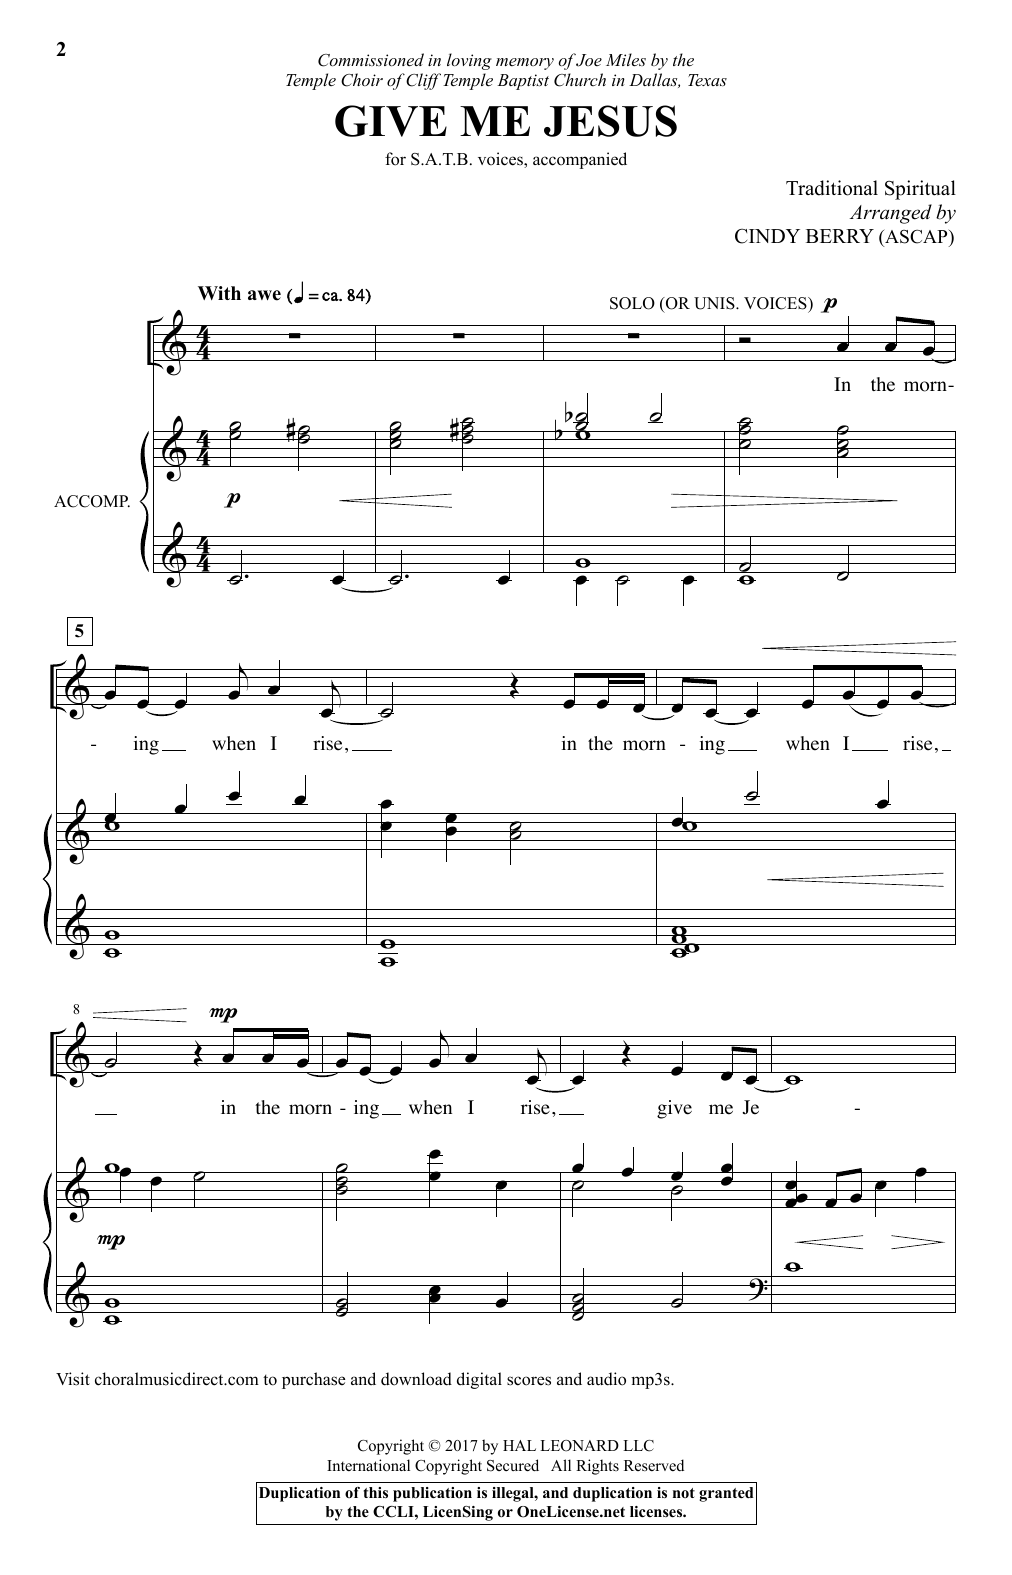 Download Cindy Berry Give Me Jesus Sheet Music